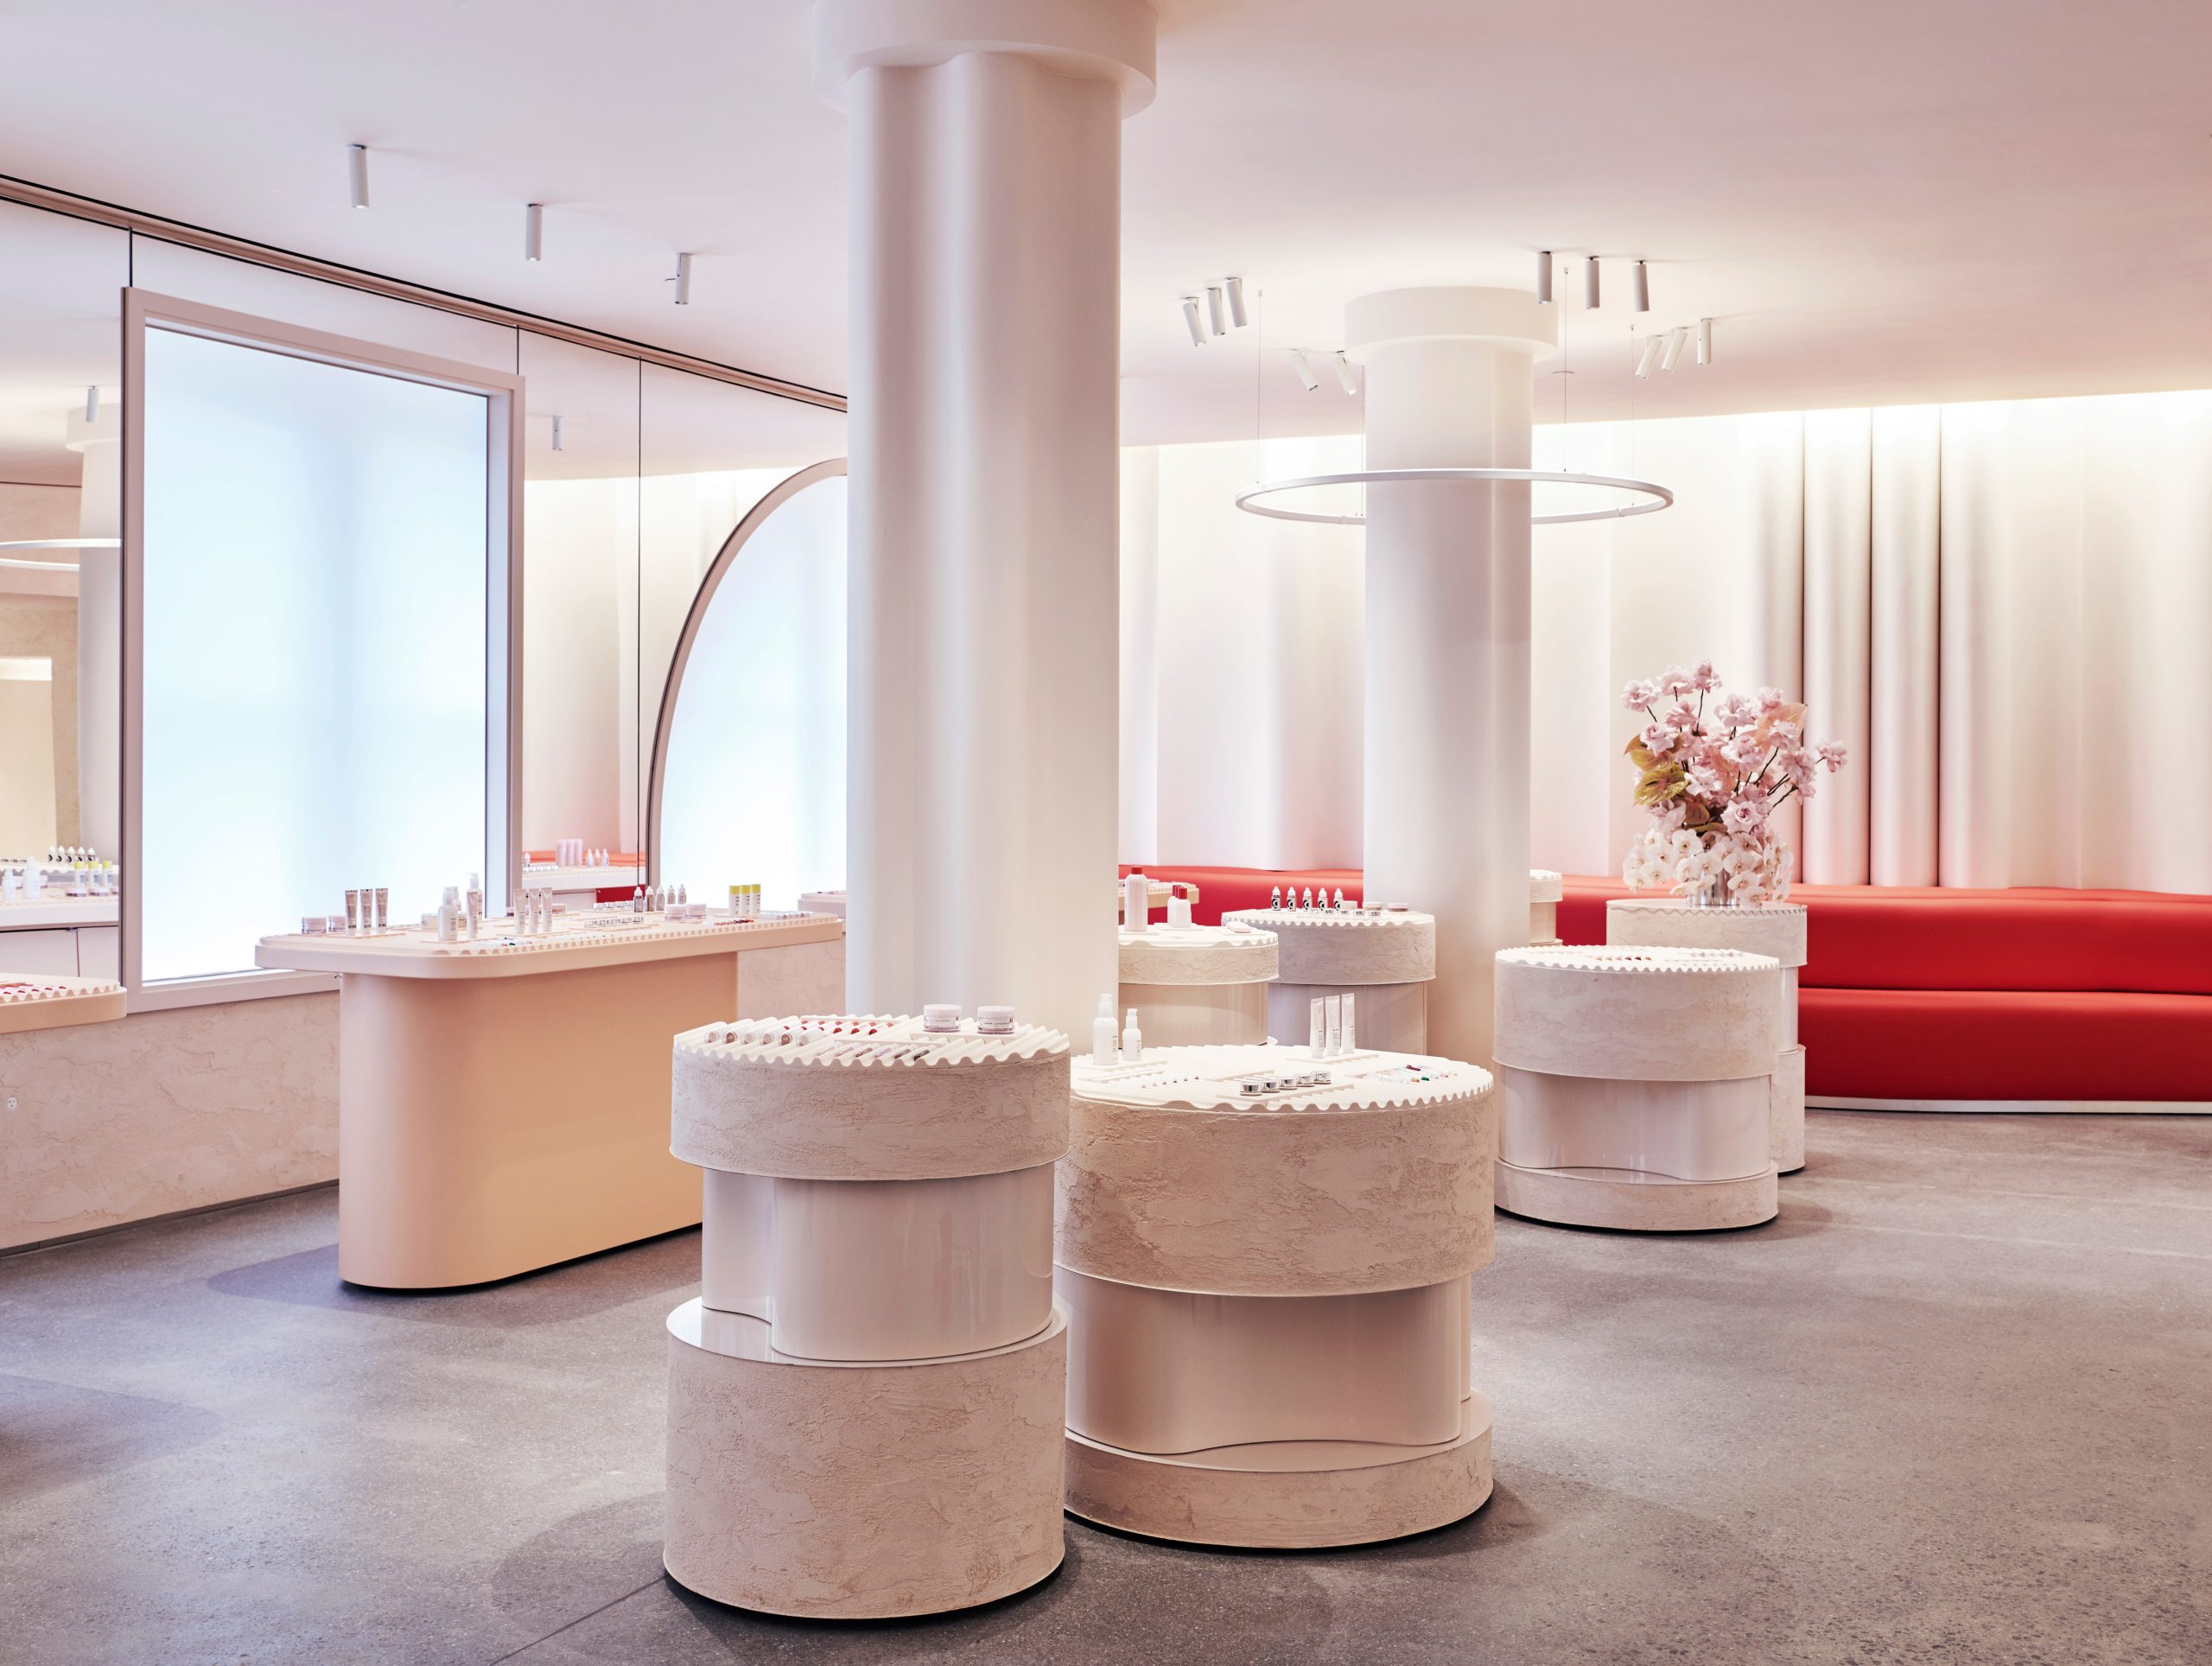 Glossier Will See You Now | News & Analysis